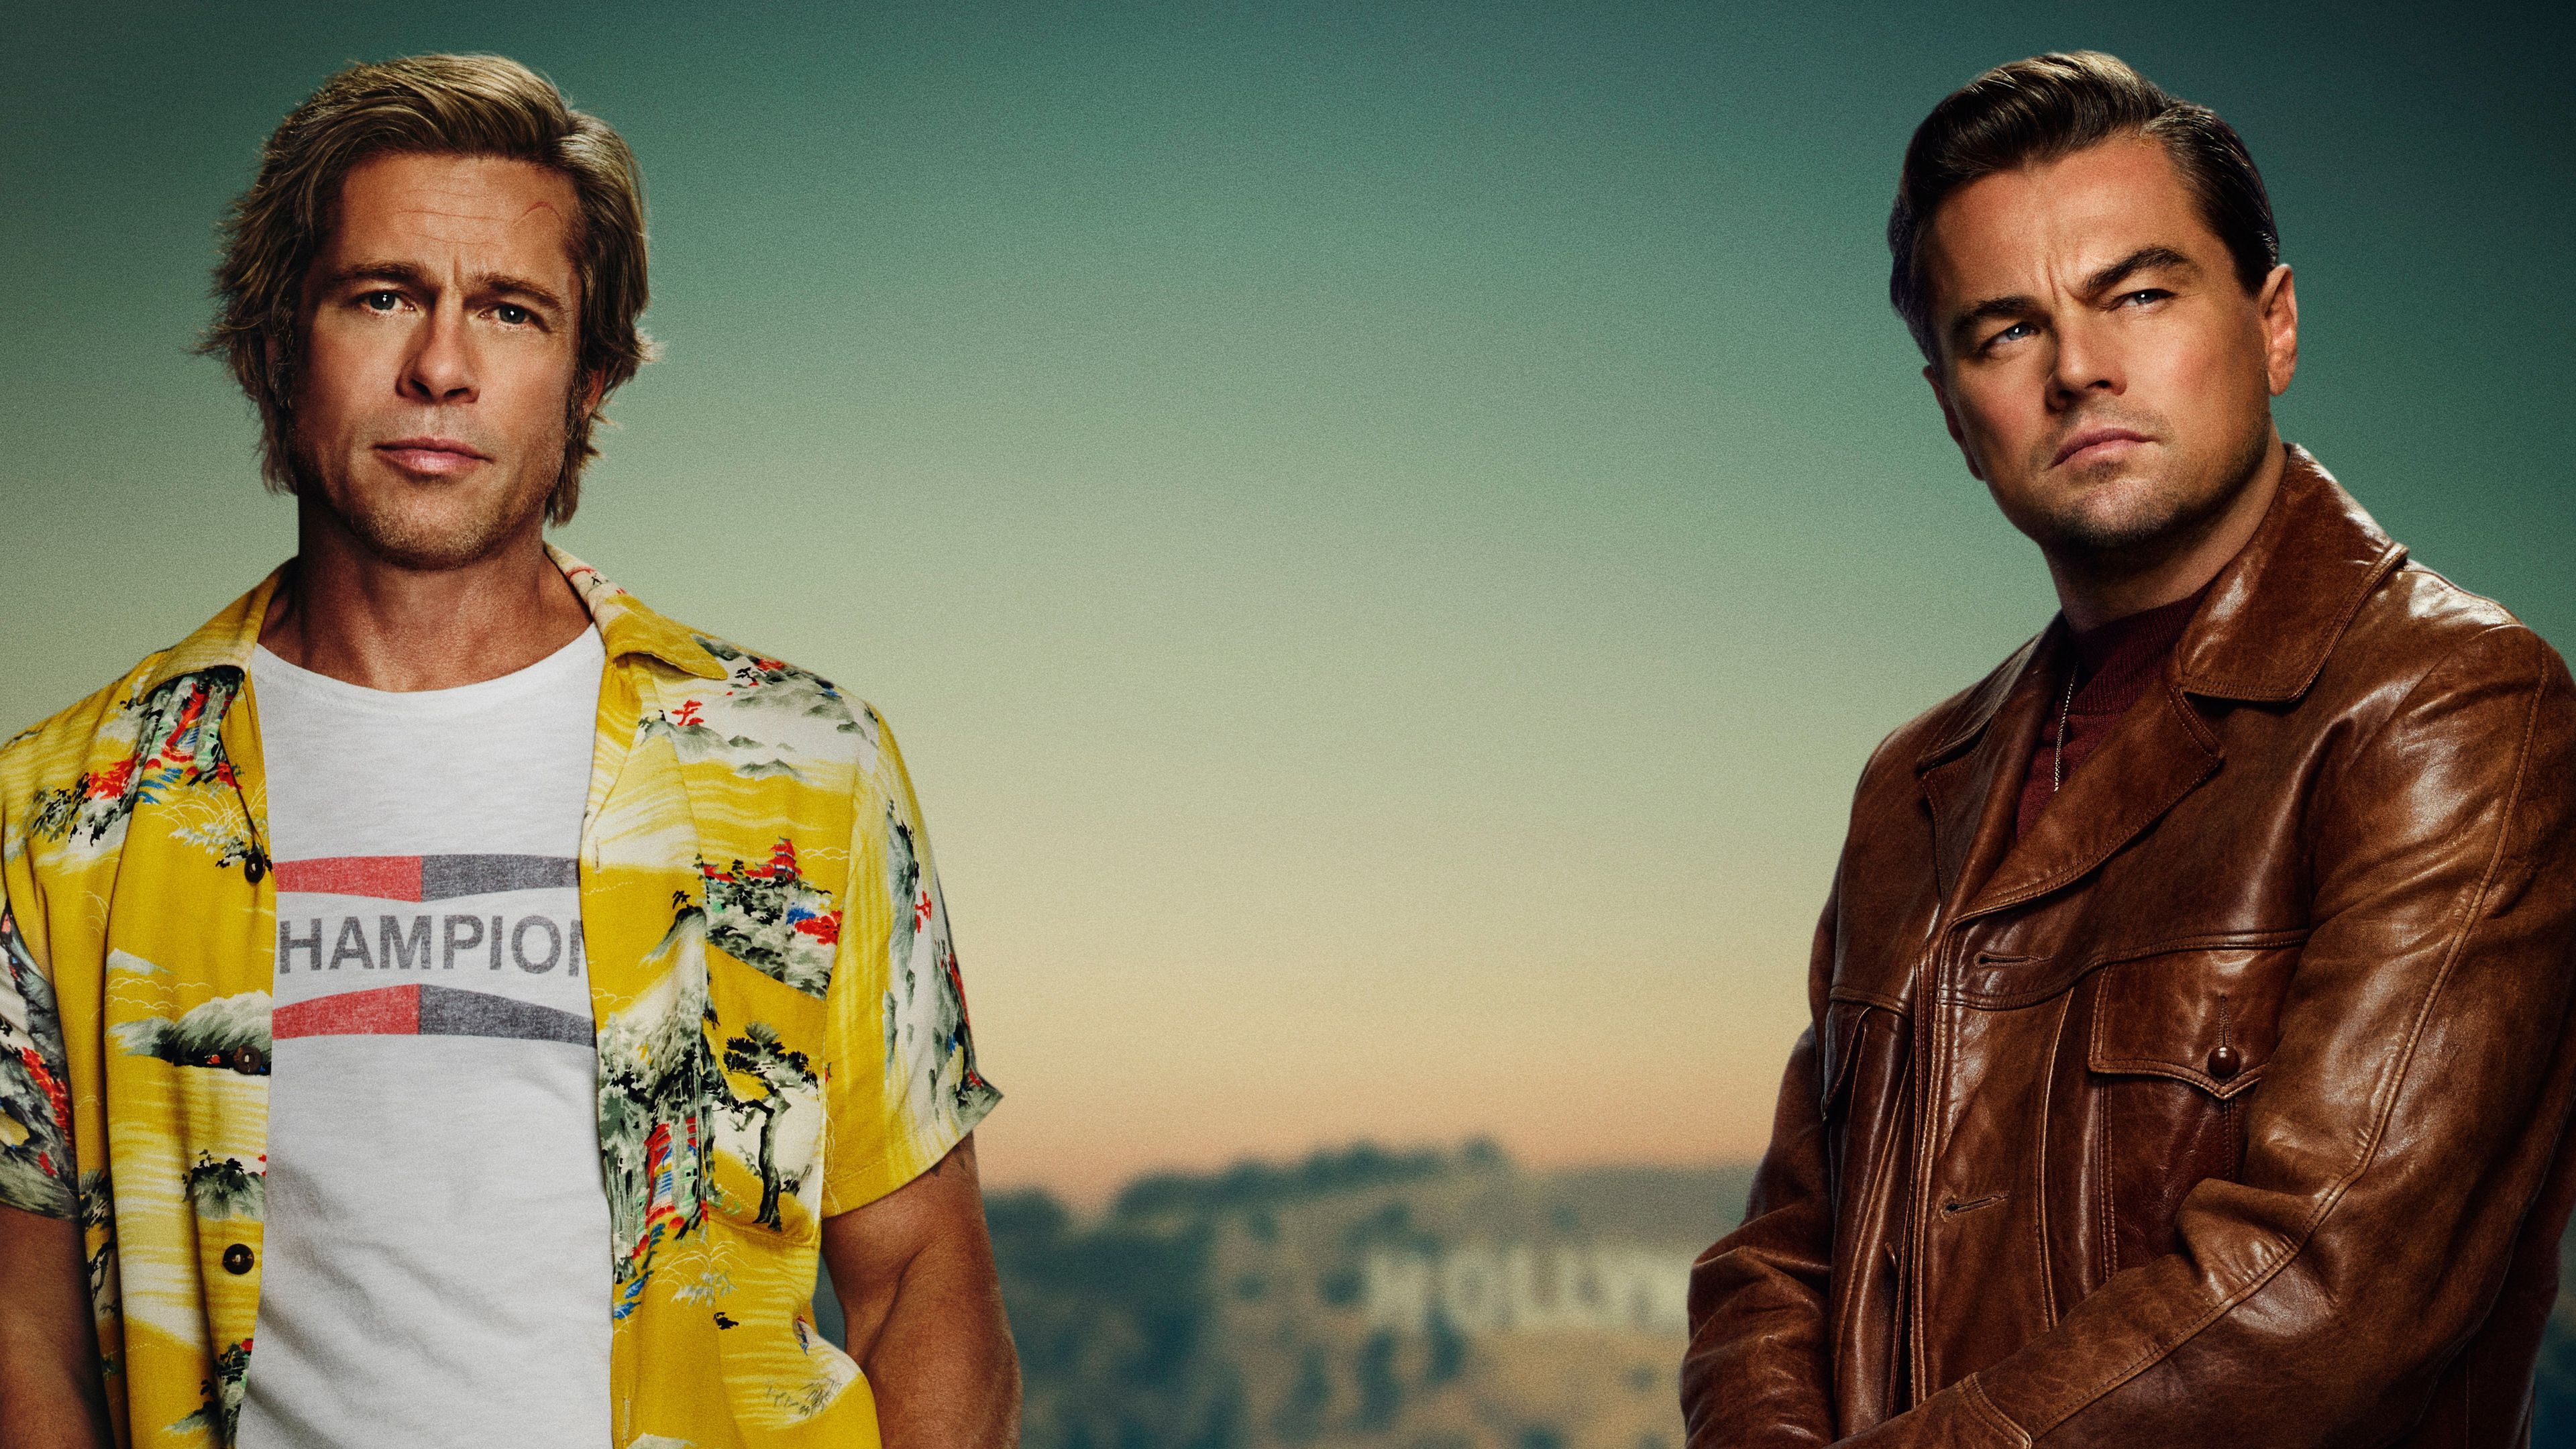 Once Upon A Time In Hollywood 2019 4k once upon a time in hollywood wallpaper, movies wallpaper, leonardo dicaprio w. Hollywood, Quentin tarantino, In hollywood